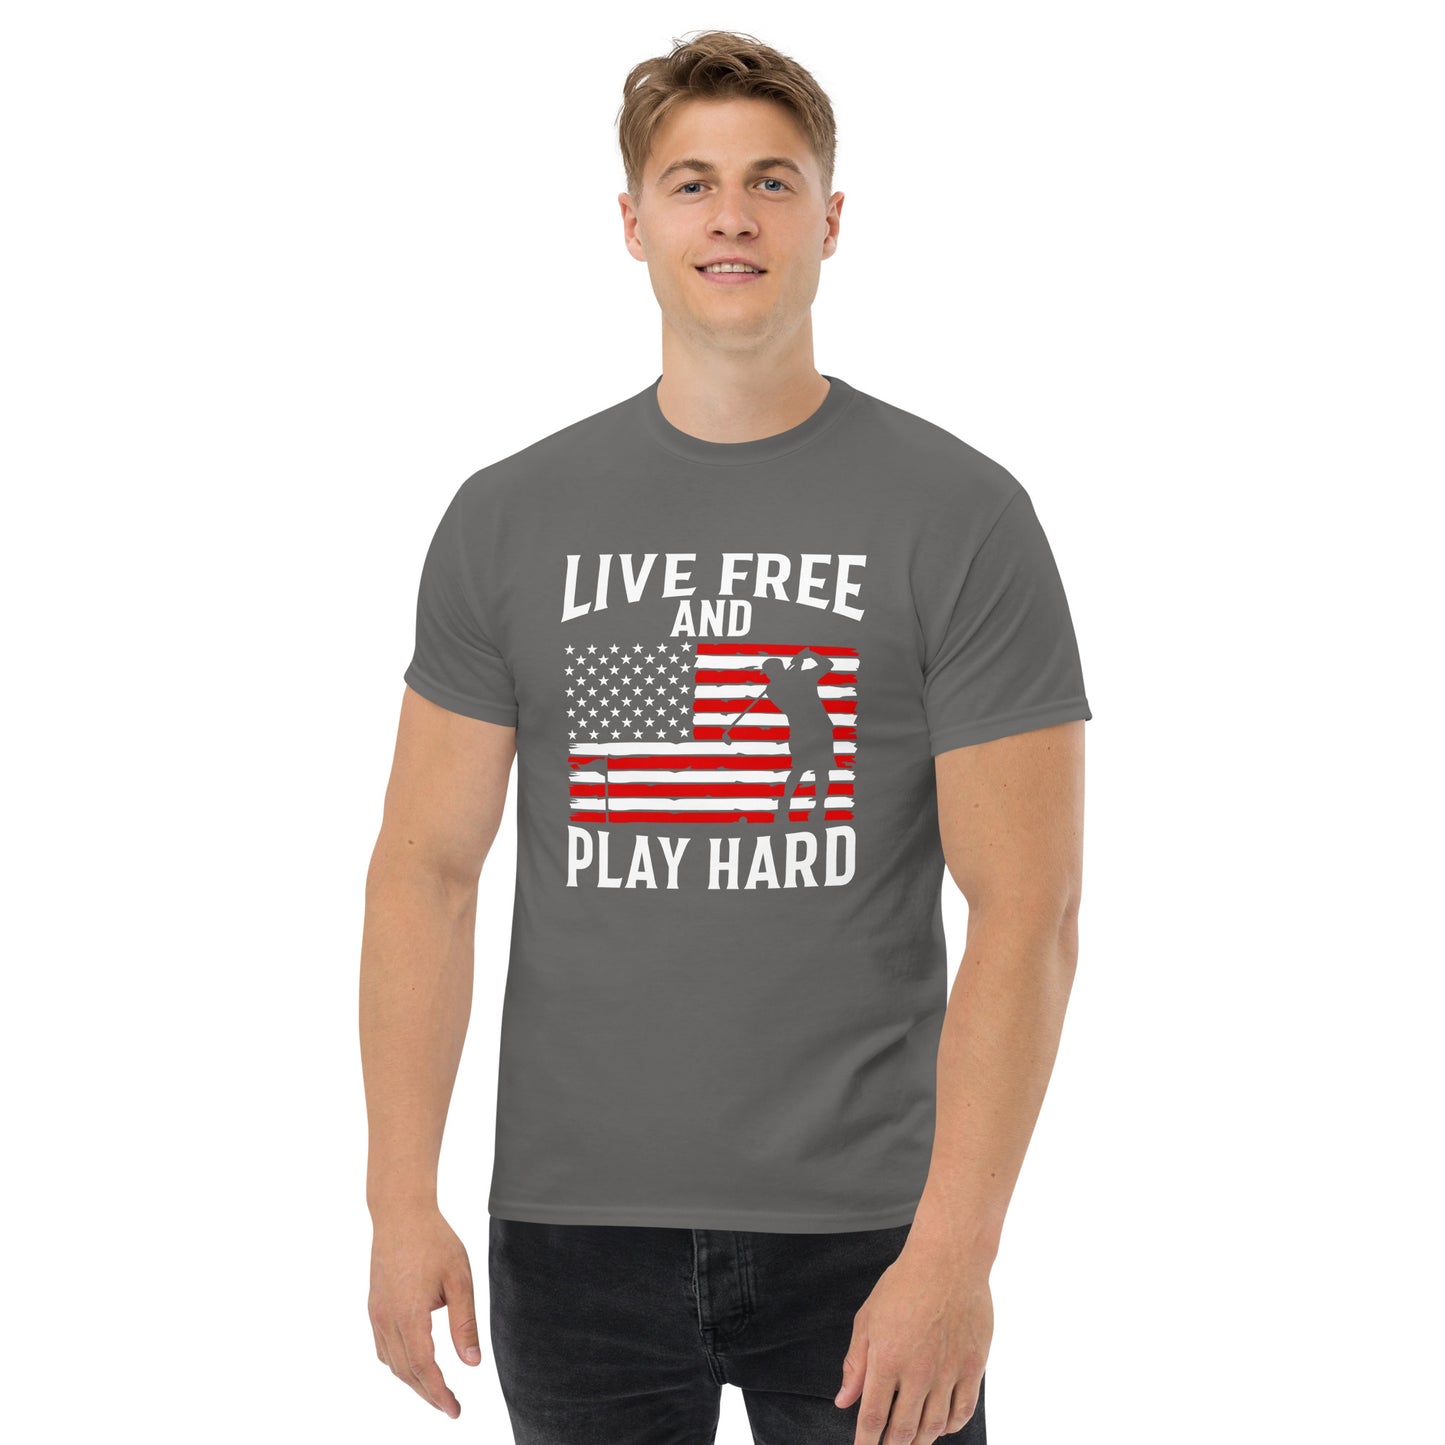 Live Free and Play Hard T-Shirt